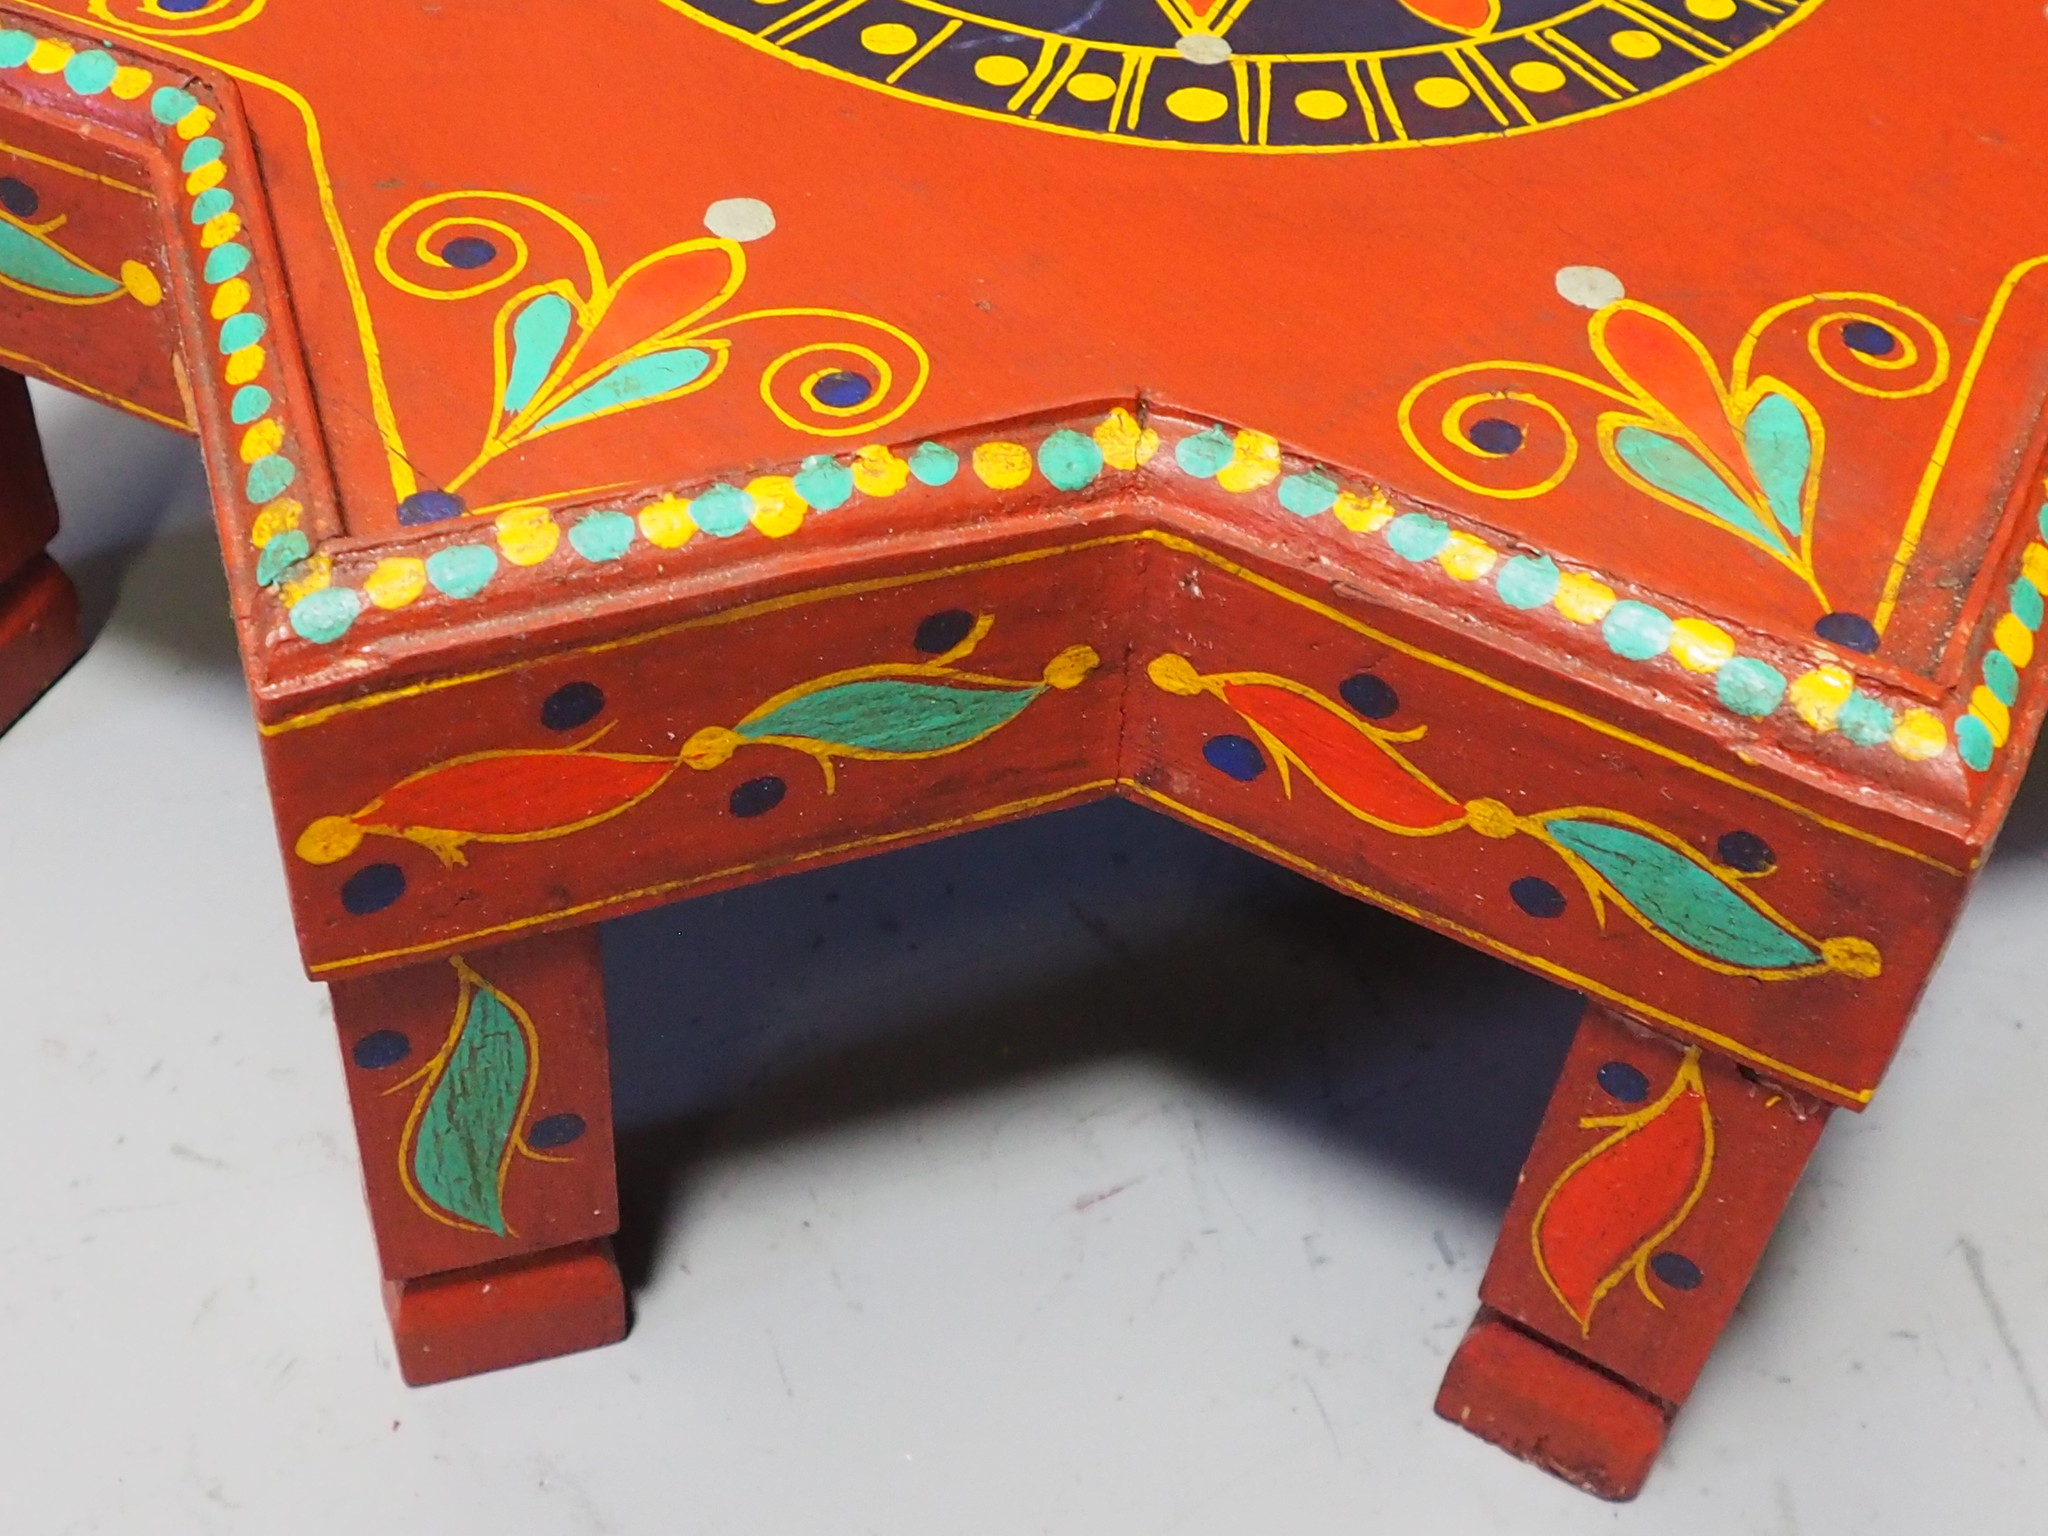 55 cm ∅   orient  hand painted   Sat Coffee Table   from Afghanistan No:B